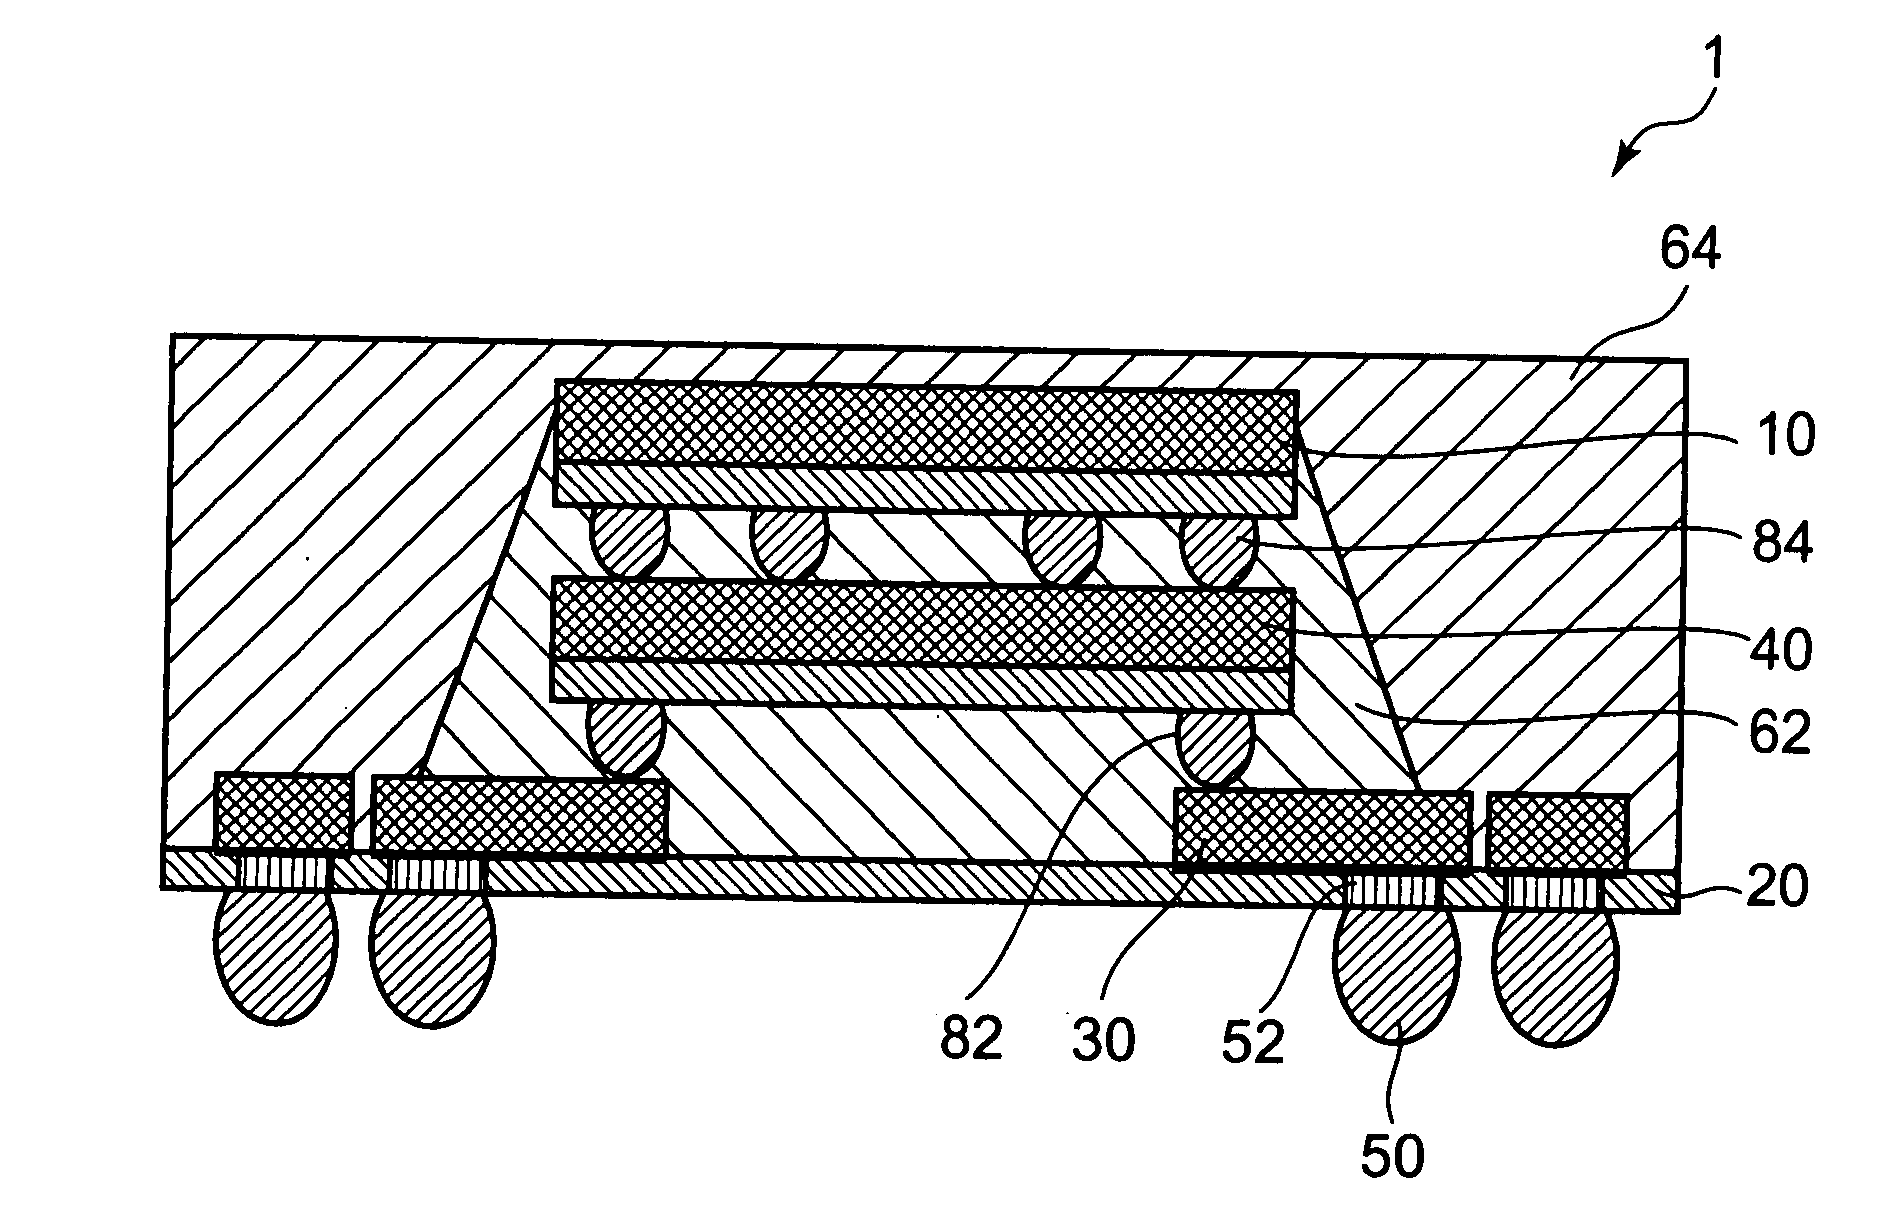 Semiconductor device including microstrip line and coplanar line